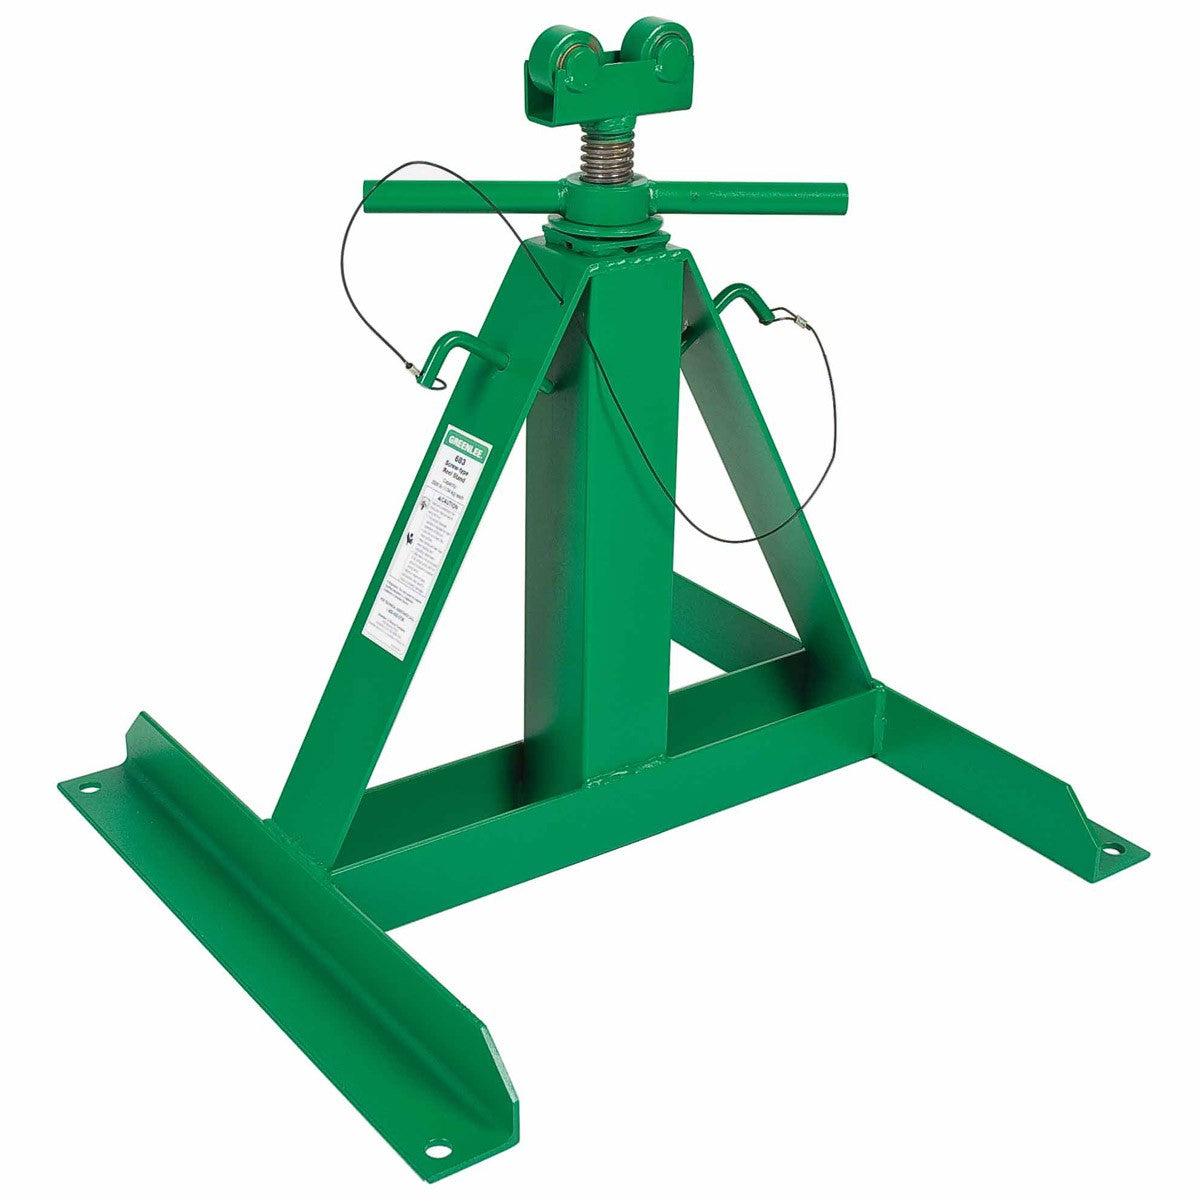 Greenlee 683 Screw-Type Reel Stand 22" - 54" (1 Stand Only)